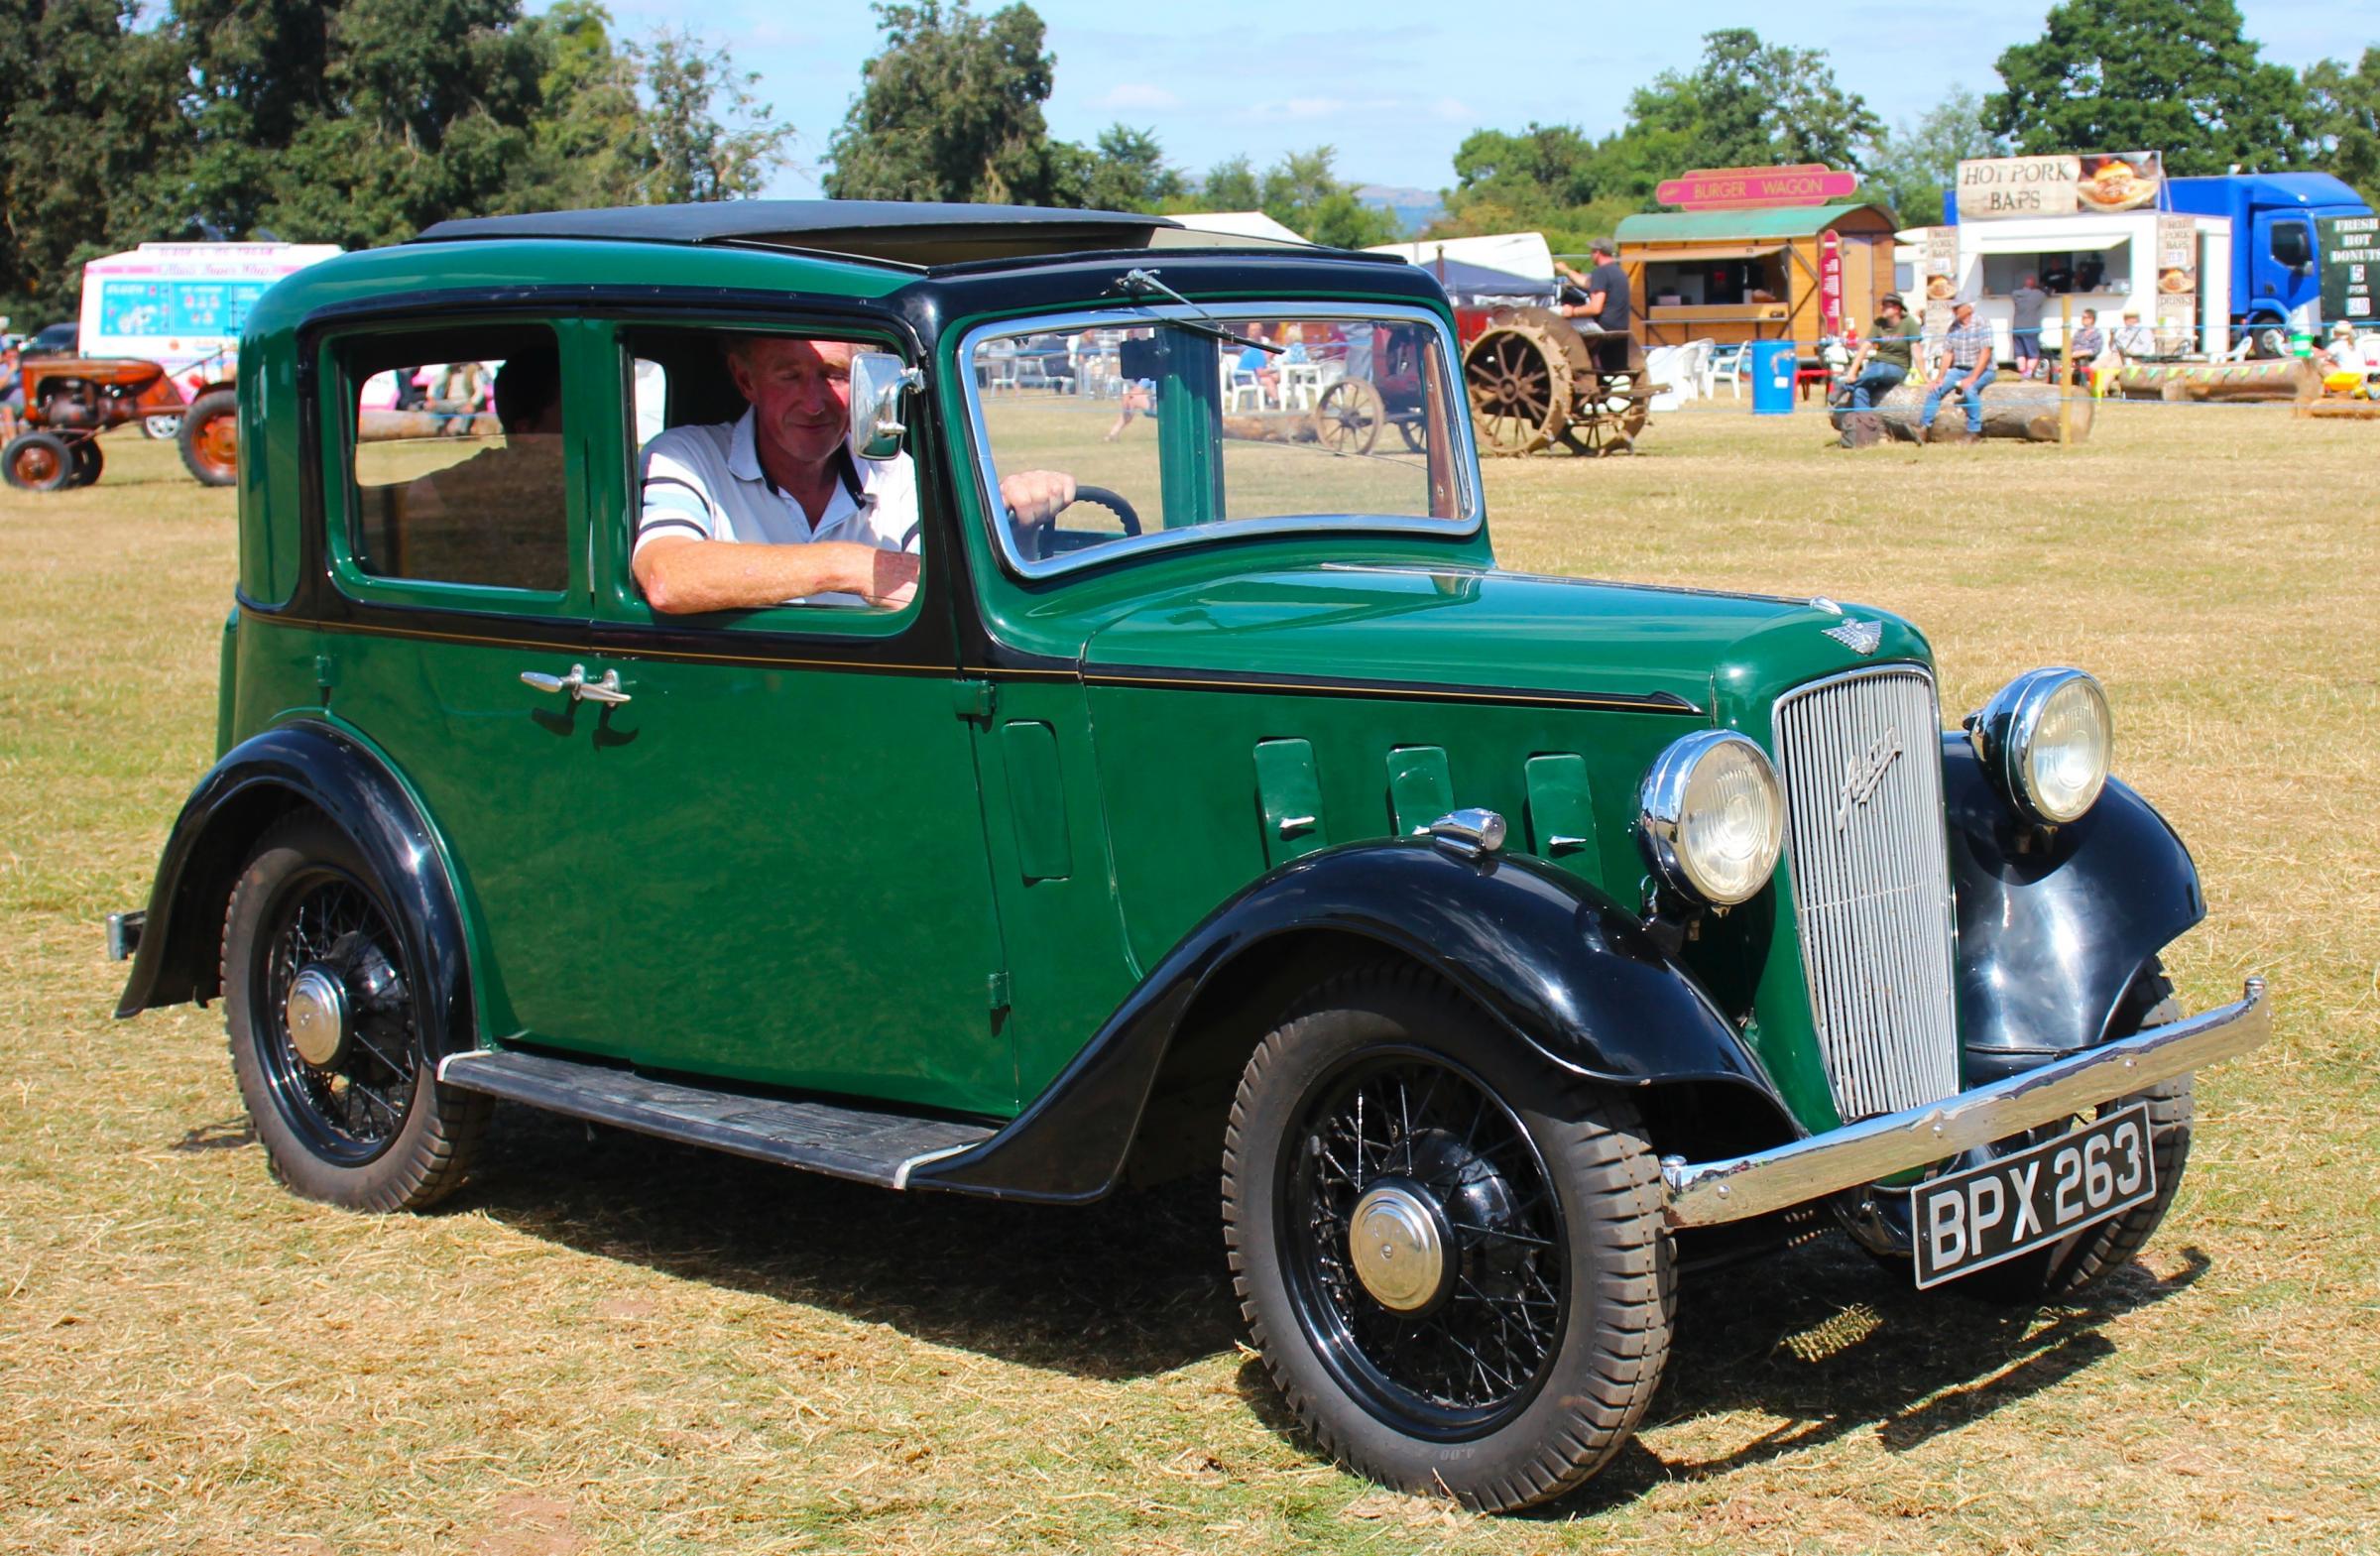 Michael Wozencraft of Lucton with his 1936 Austin 10 Lichfield